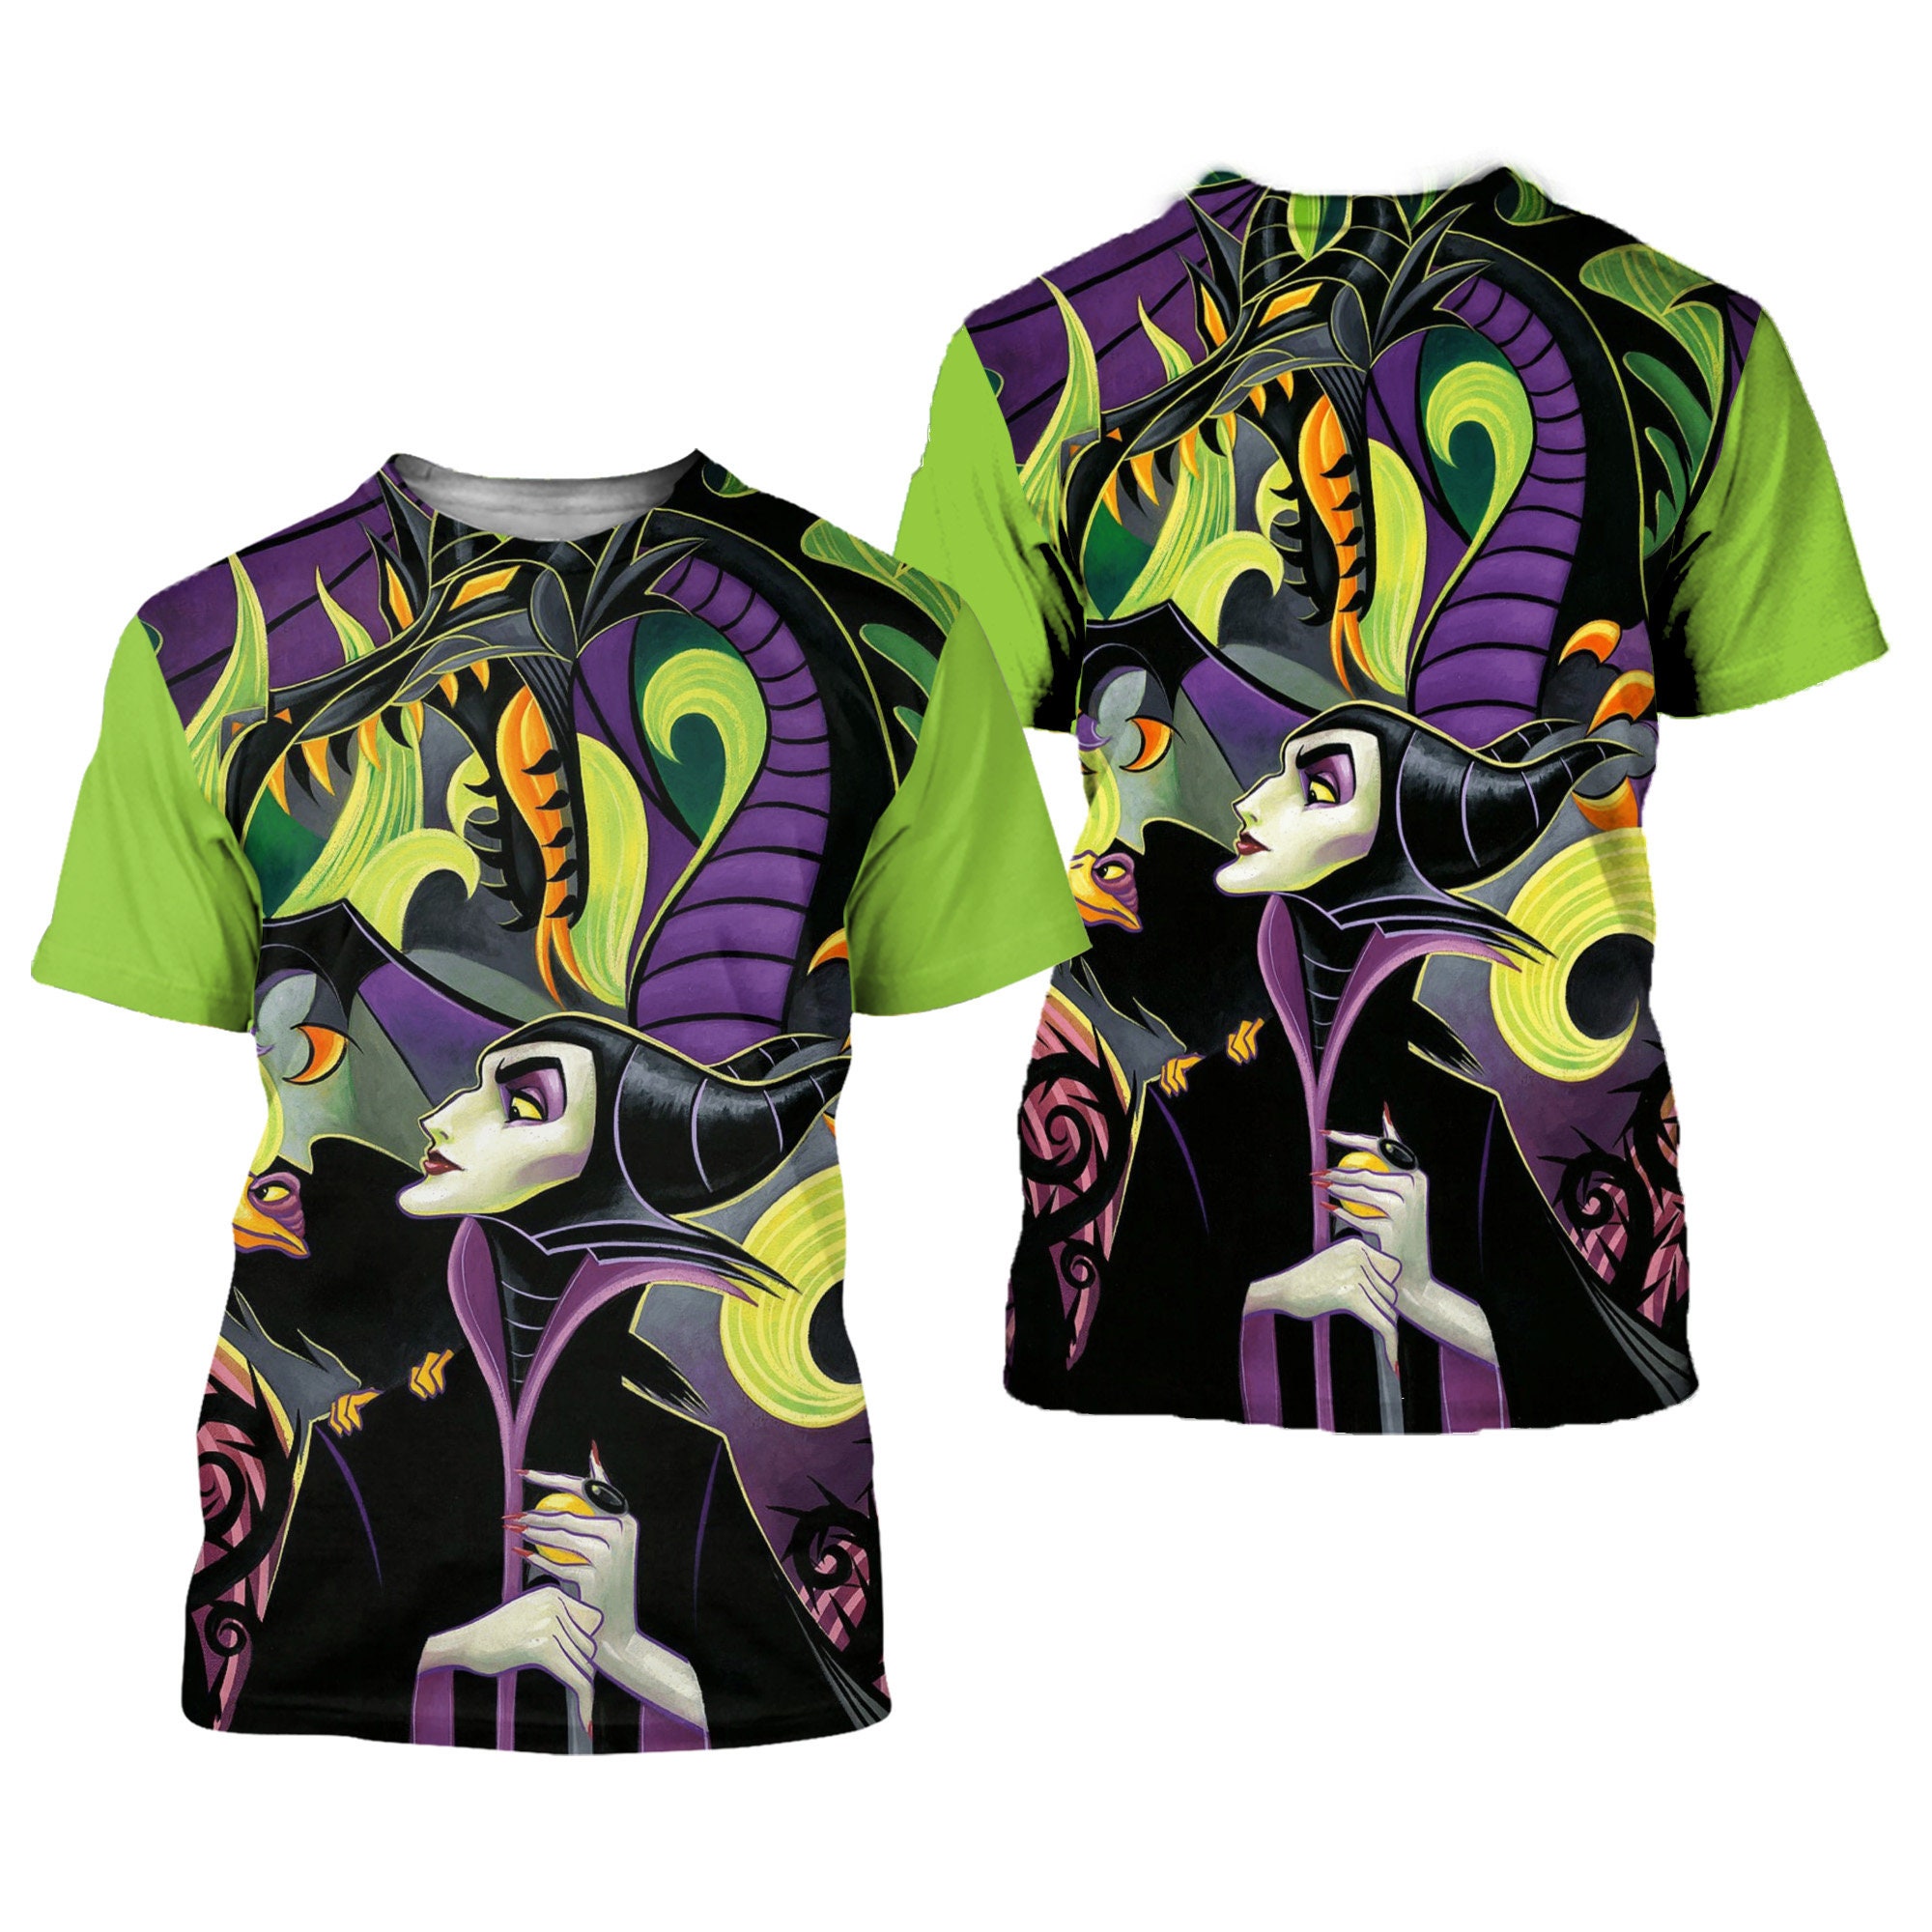 Discover Maleficent & Diablo Green Button Overalls Patterns Disney Outfits Unisex Casual T-shirts 3D